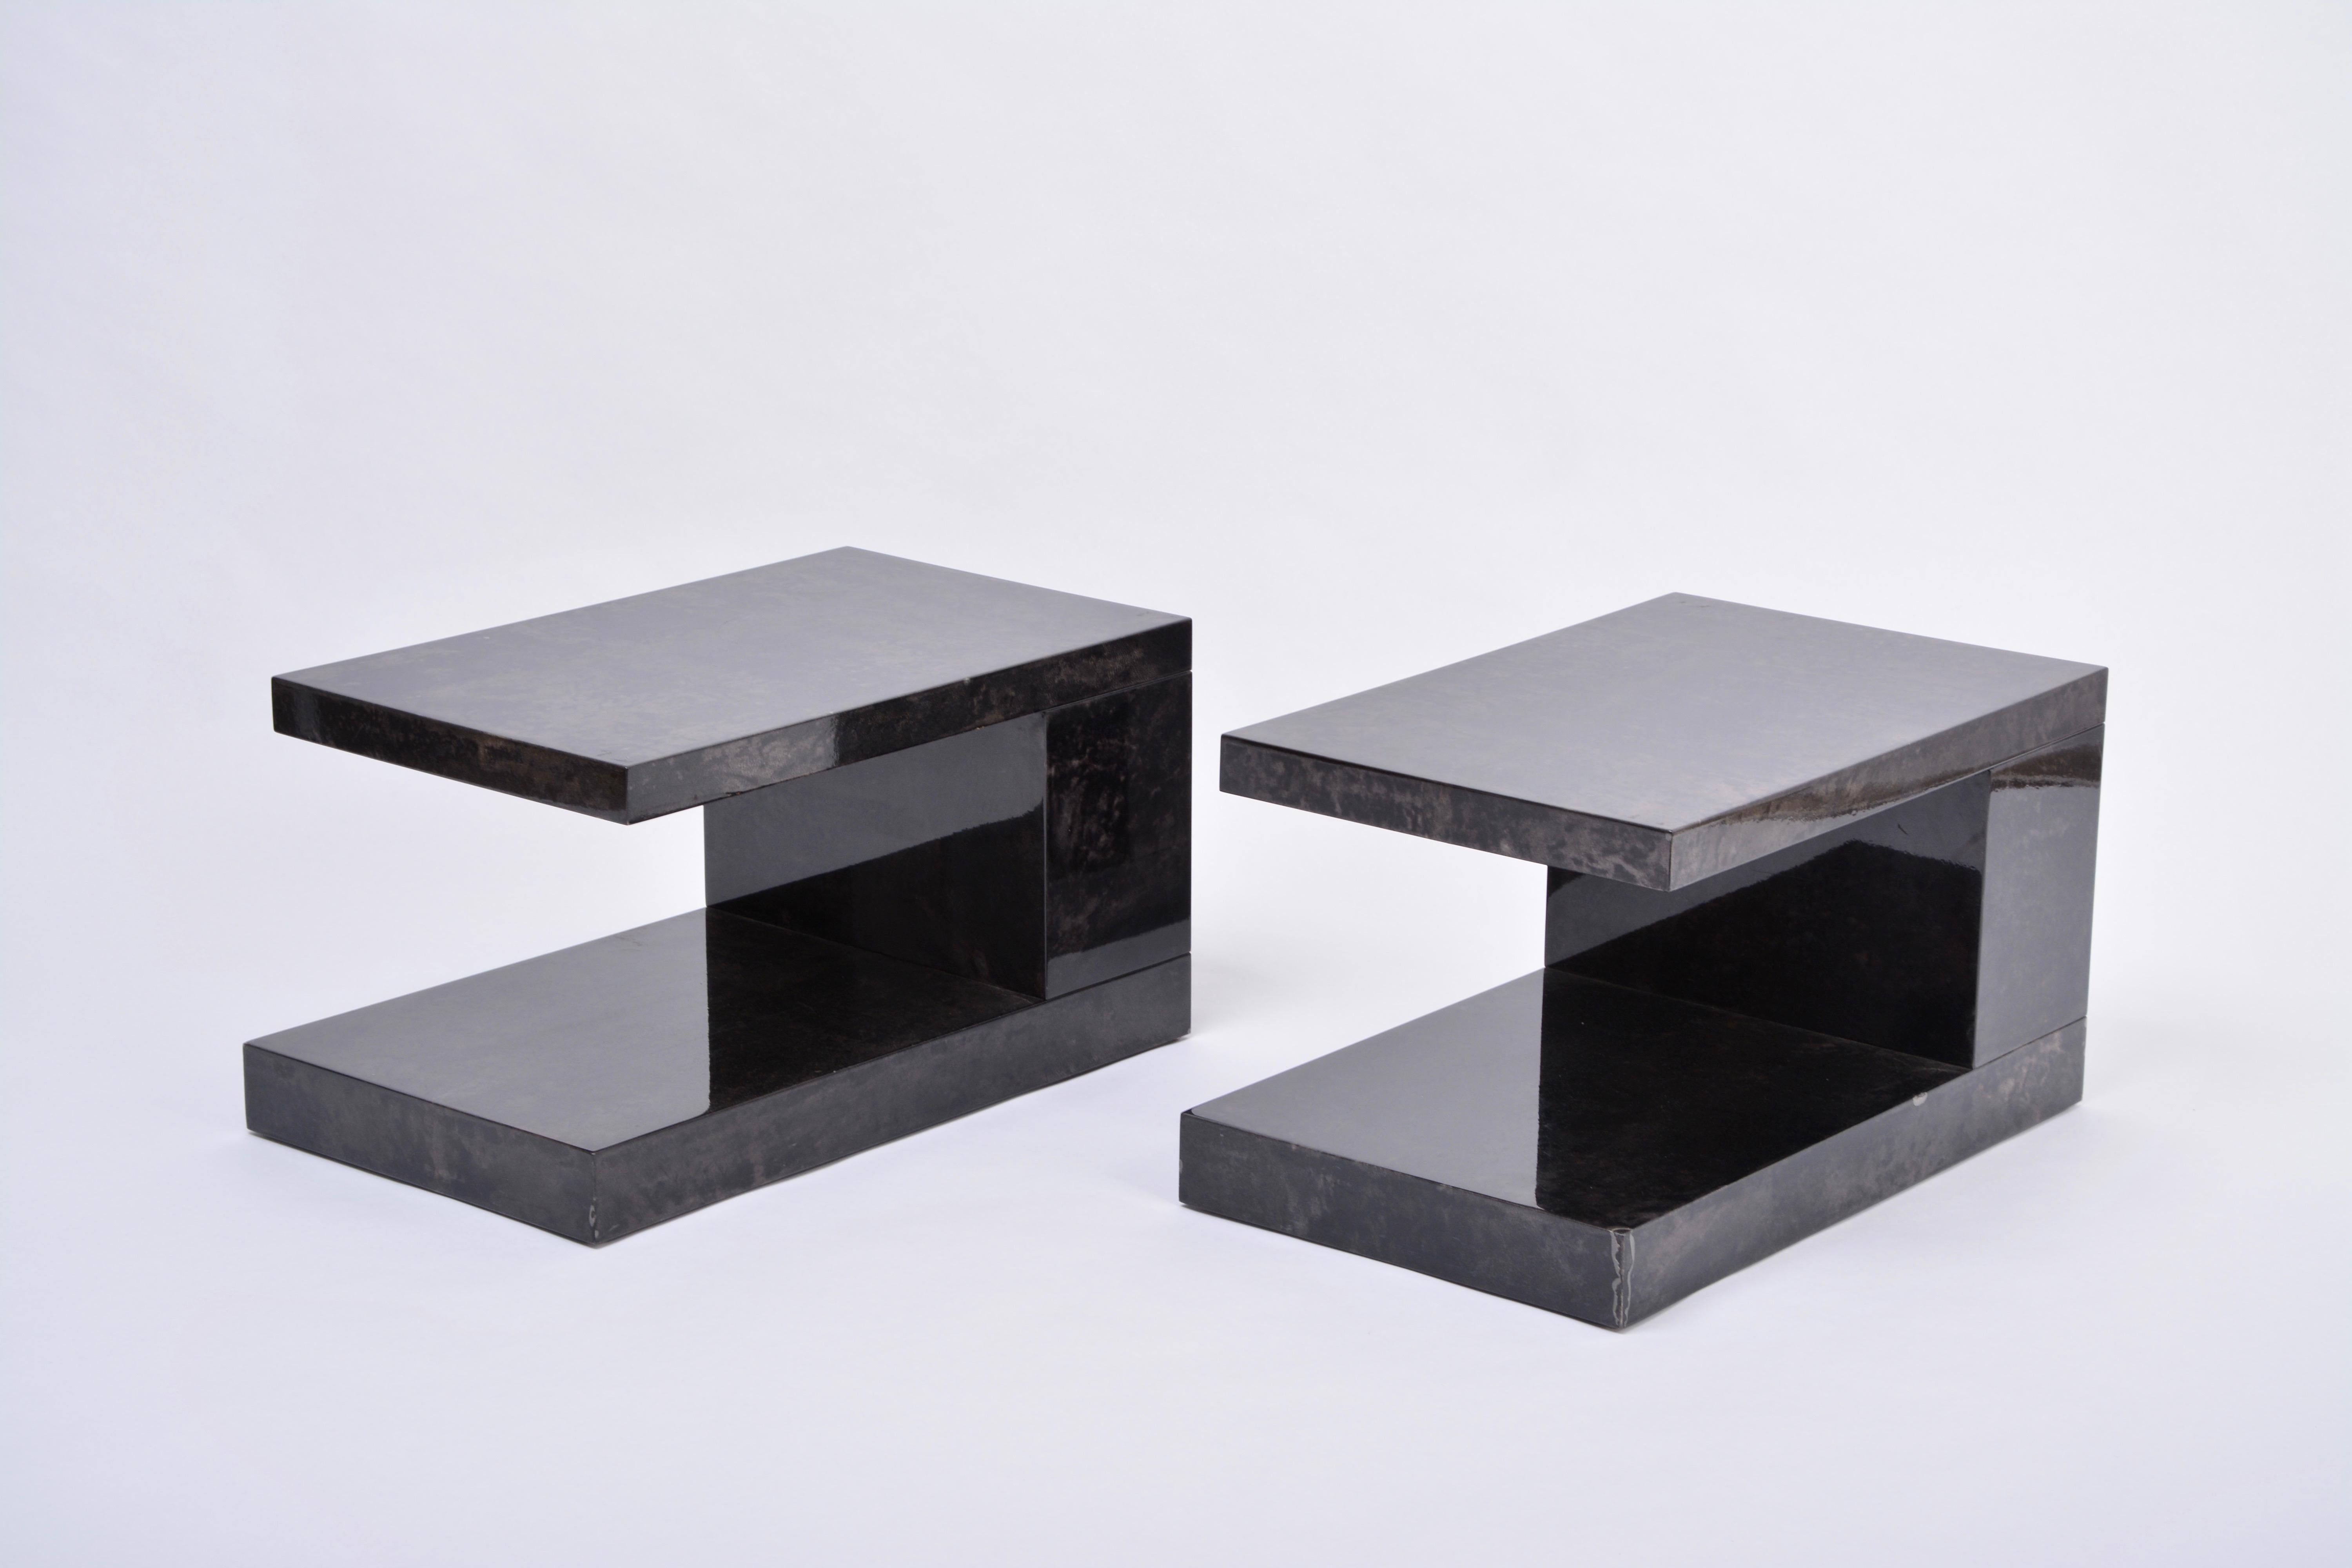 Pair of lacquered goat skin side tables by Aldo Tura, 1970s
This pair of wooden side tables were designed by Aldo Tura and produced in Italy in the 1970s.
The tables are manufactured in Aldo Tura's signature style: the structures are made of wood